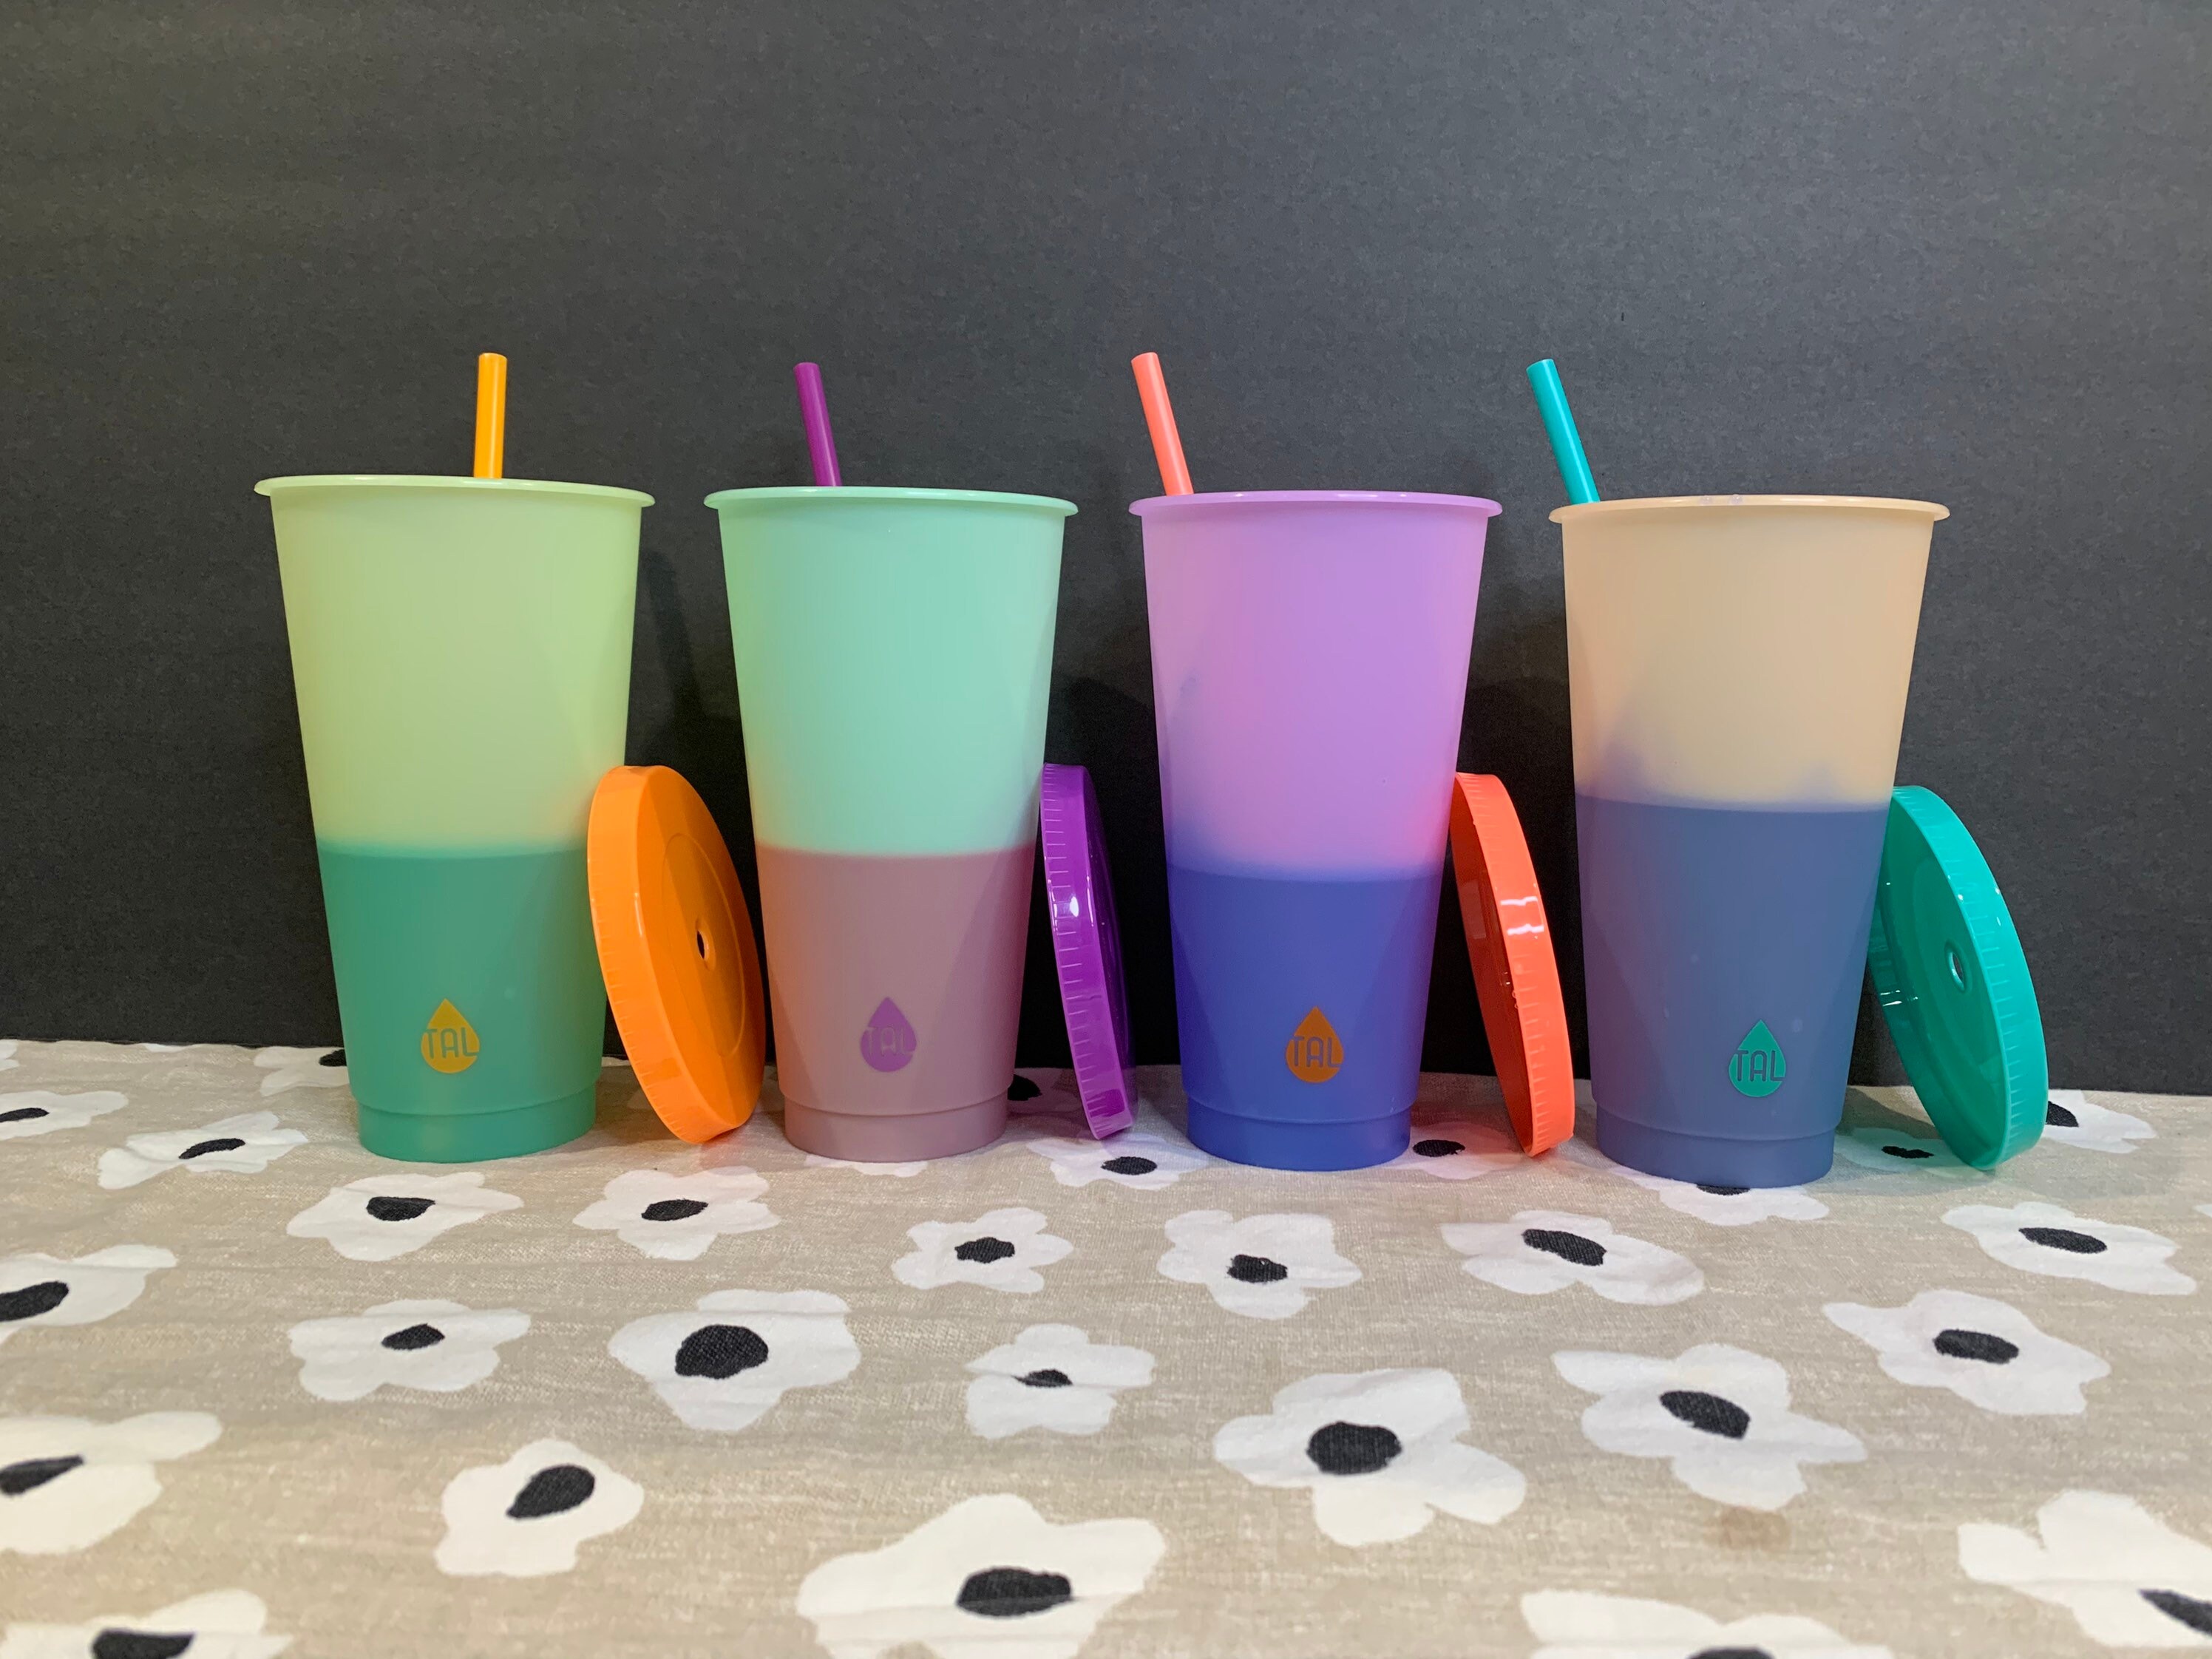 TAL Color Changing Cup with Lid and Straw 24oz, Pattern - Walmart